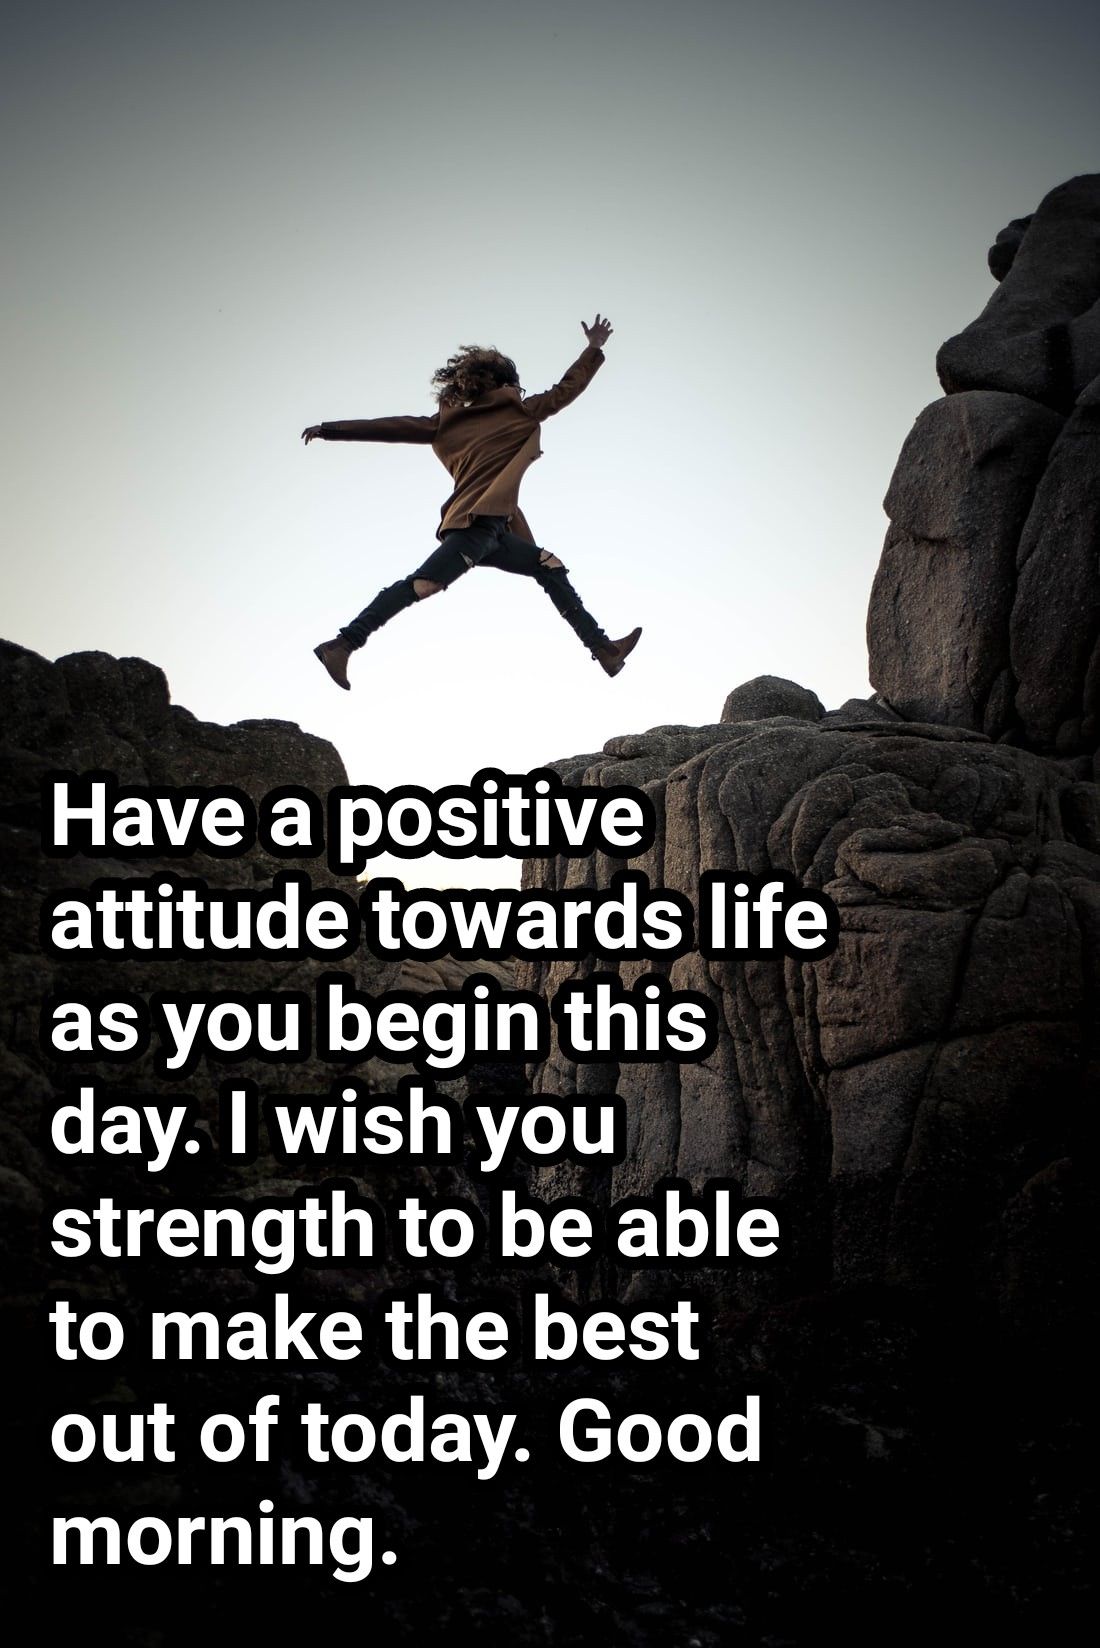 Good Morning Positive Quotes Download Visit:https://Brainyvibe.com/2020/05/28/Good-Morning-Quotes-Download/